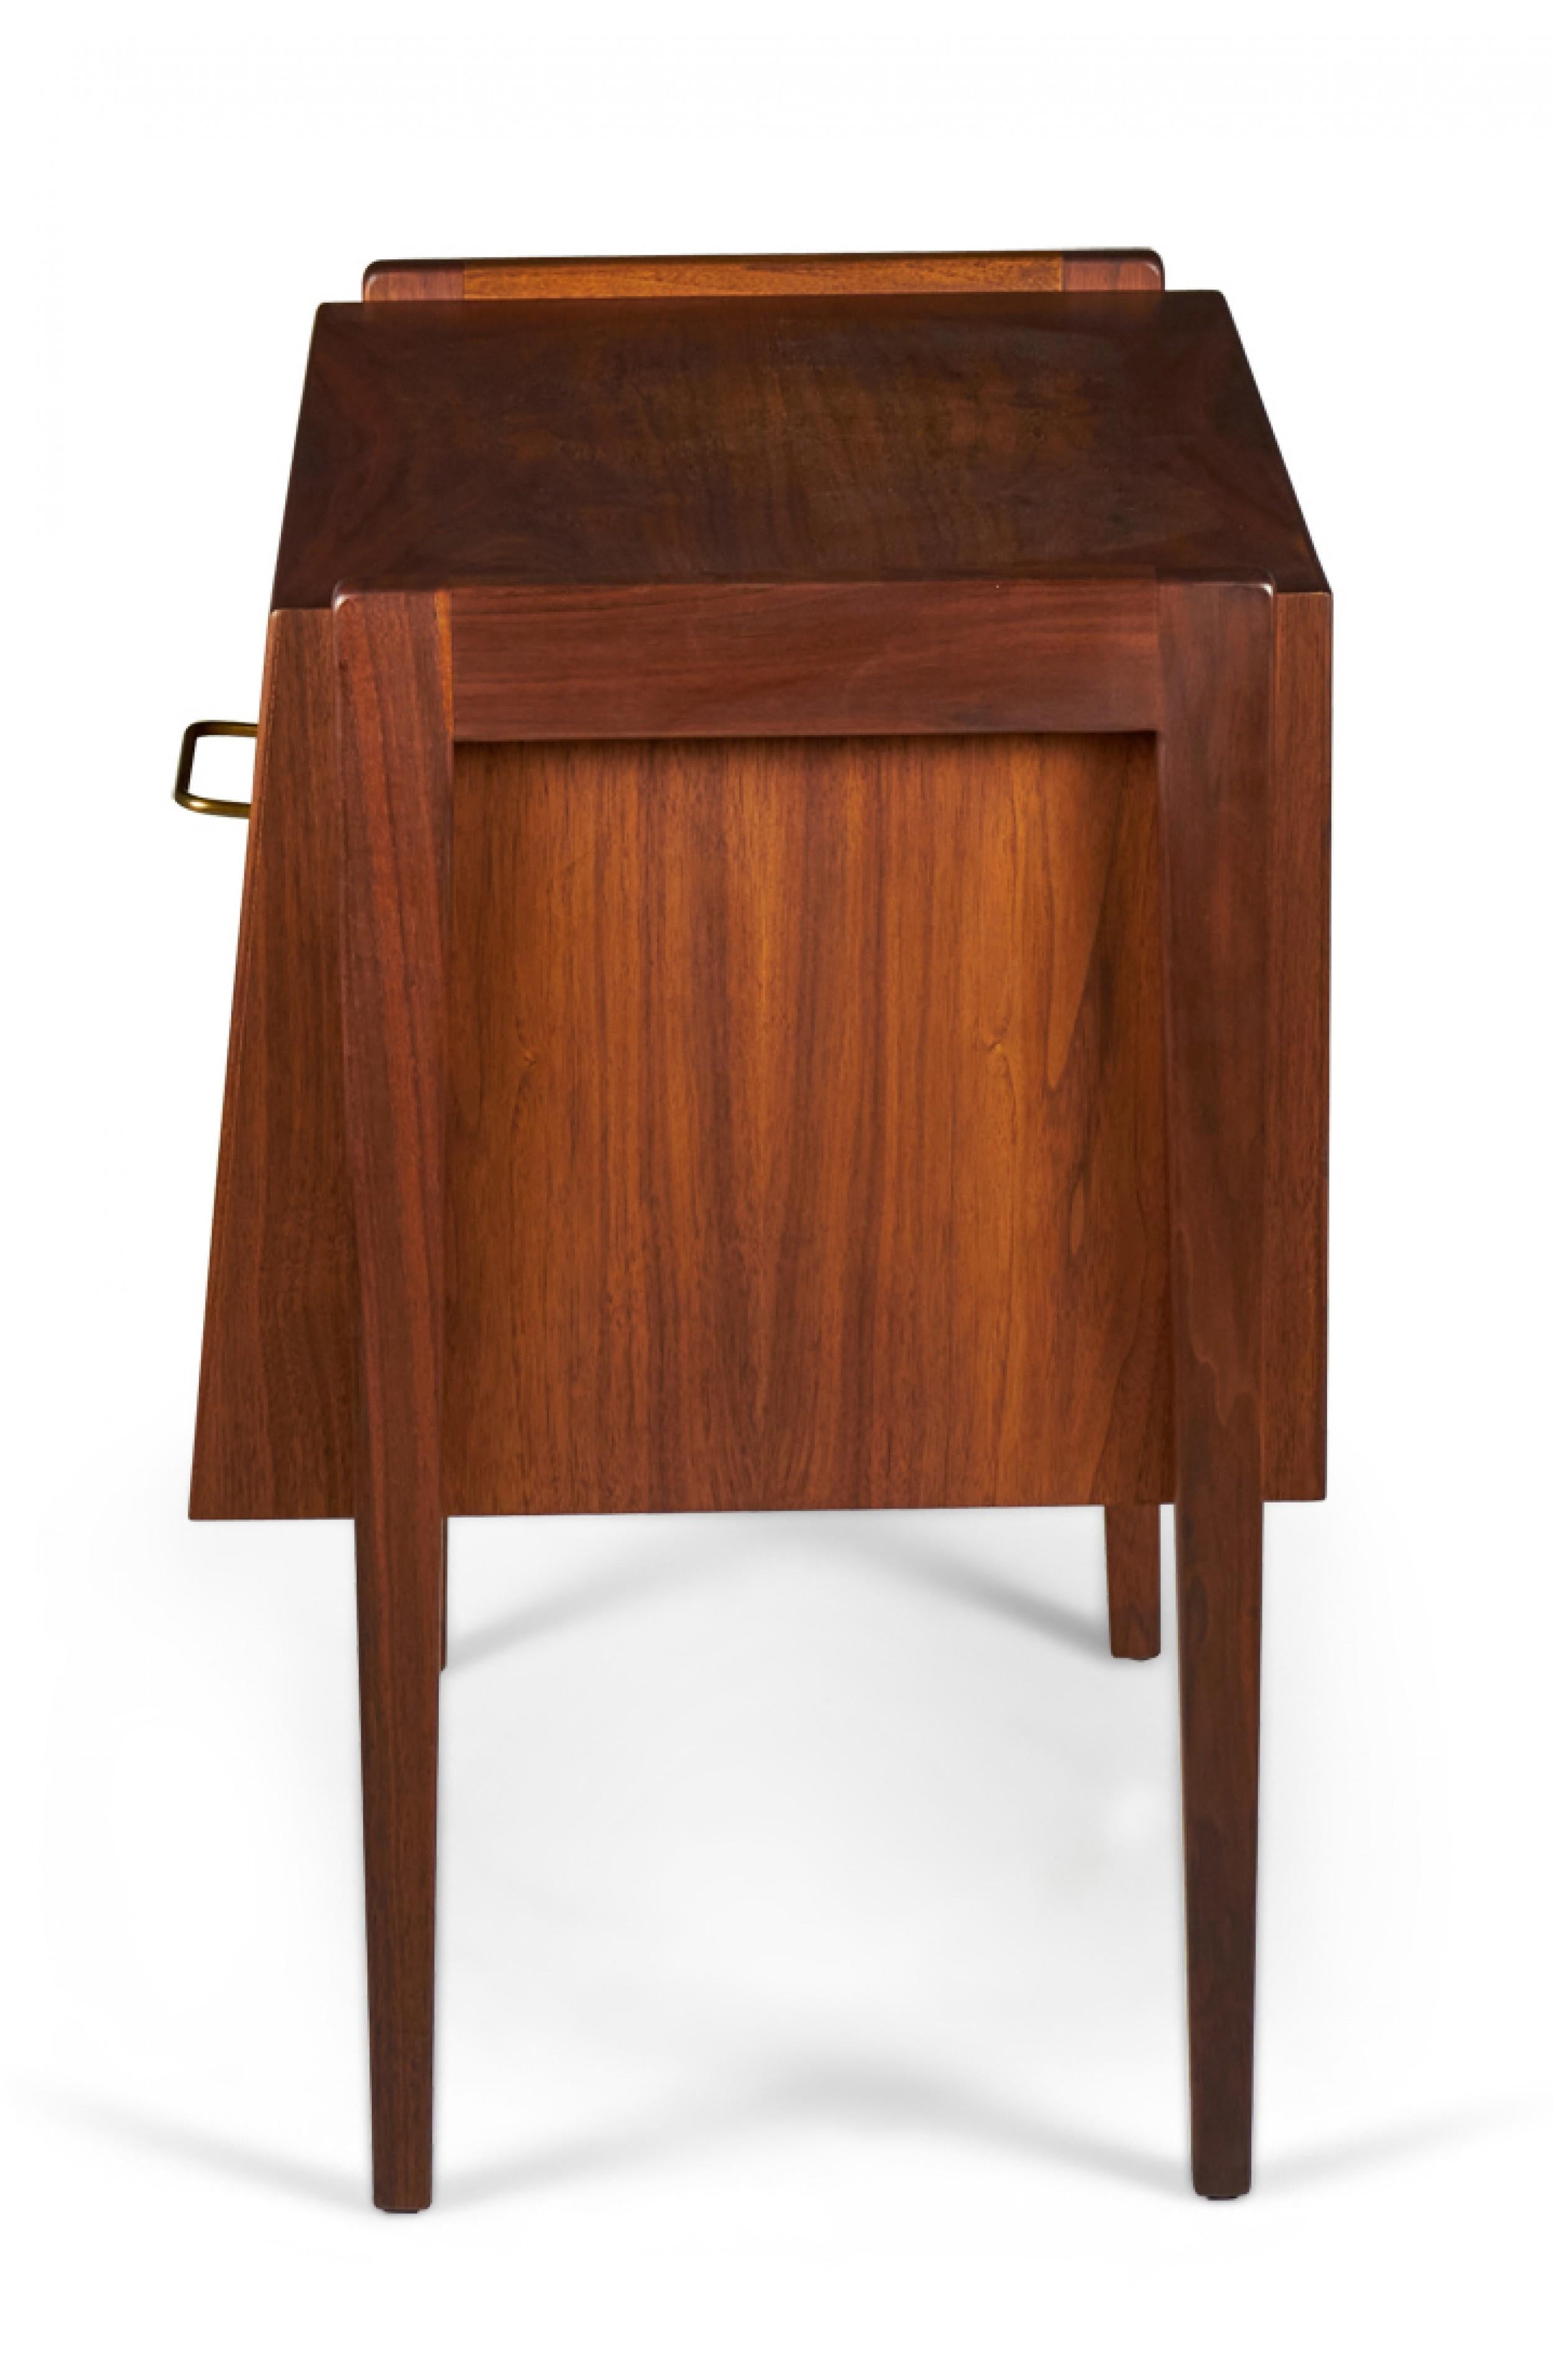 Danish Mid-Century walnut bedside table / commode with a bottom cabinet with a fall-front drawer and brass drawer pull with an open compartment above with four dowel legs. (JENS RISOM)
